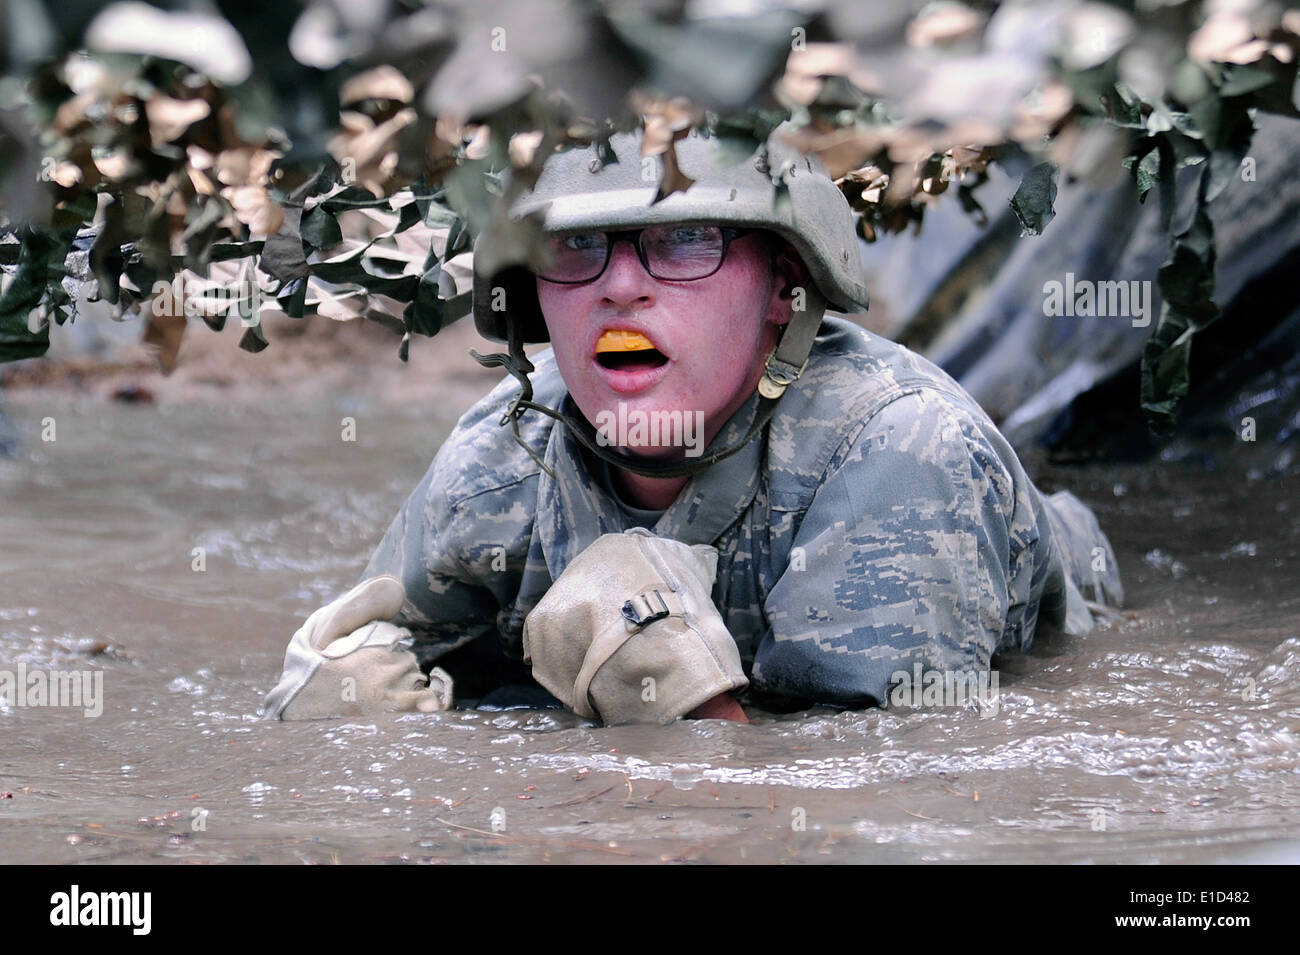 U.S. Air Force Basic Cadet Elizabeth Hicks navigates the assault course in Jacks Valley at the U.S. Air Force Academy in Colora Stock Photo